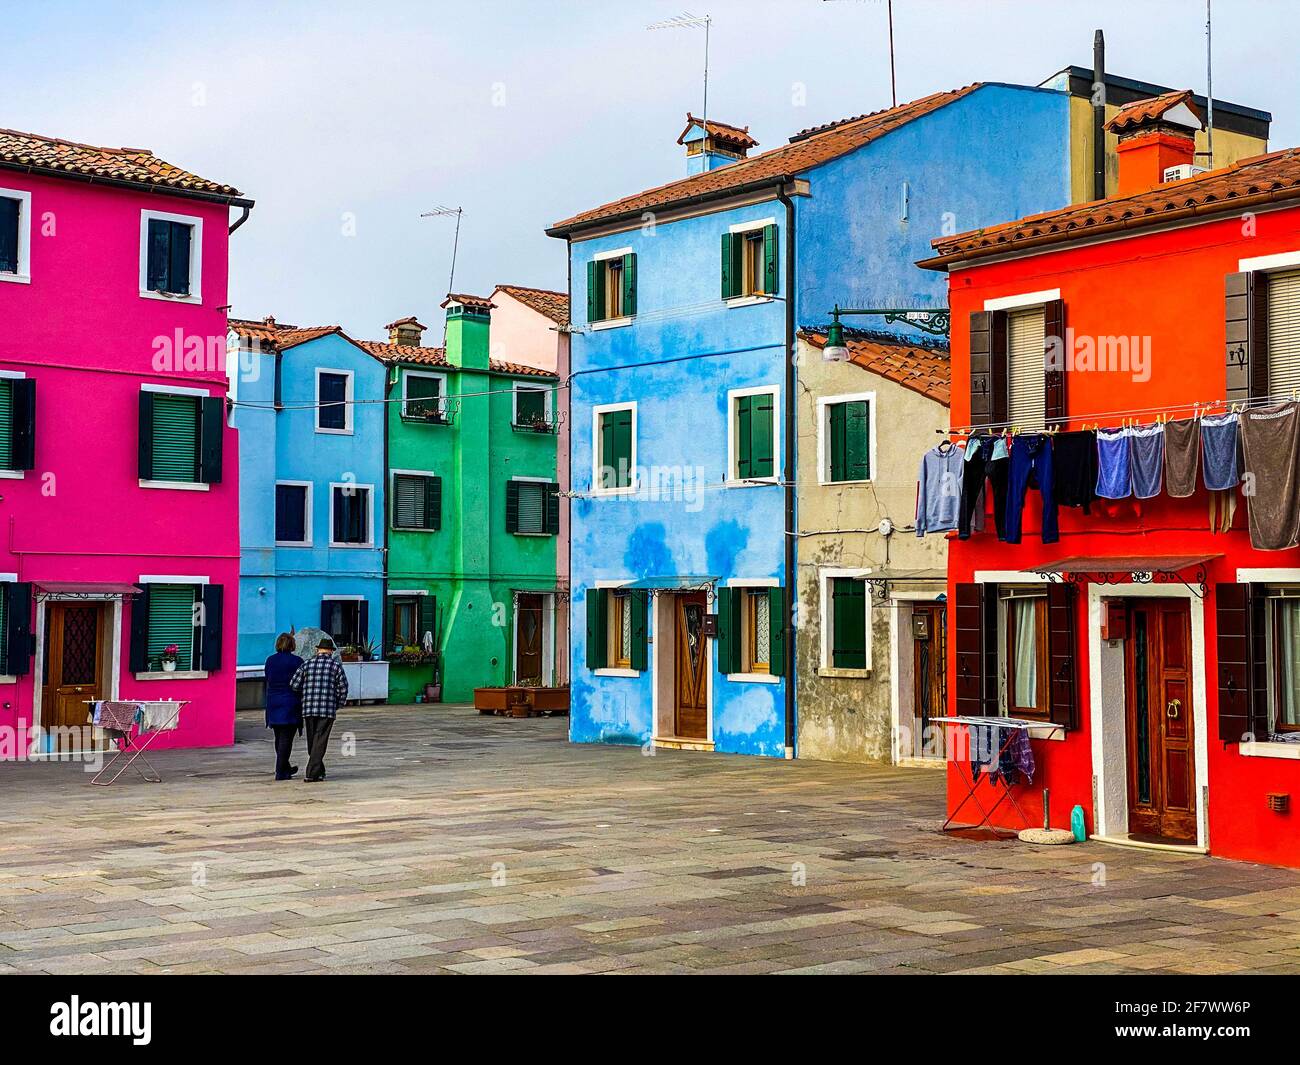 Old peoples walking in the typical and very colorful streets of Burano. We see laundry being dried outside Stock Photo